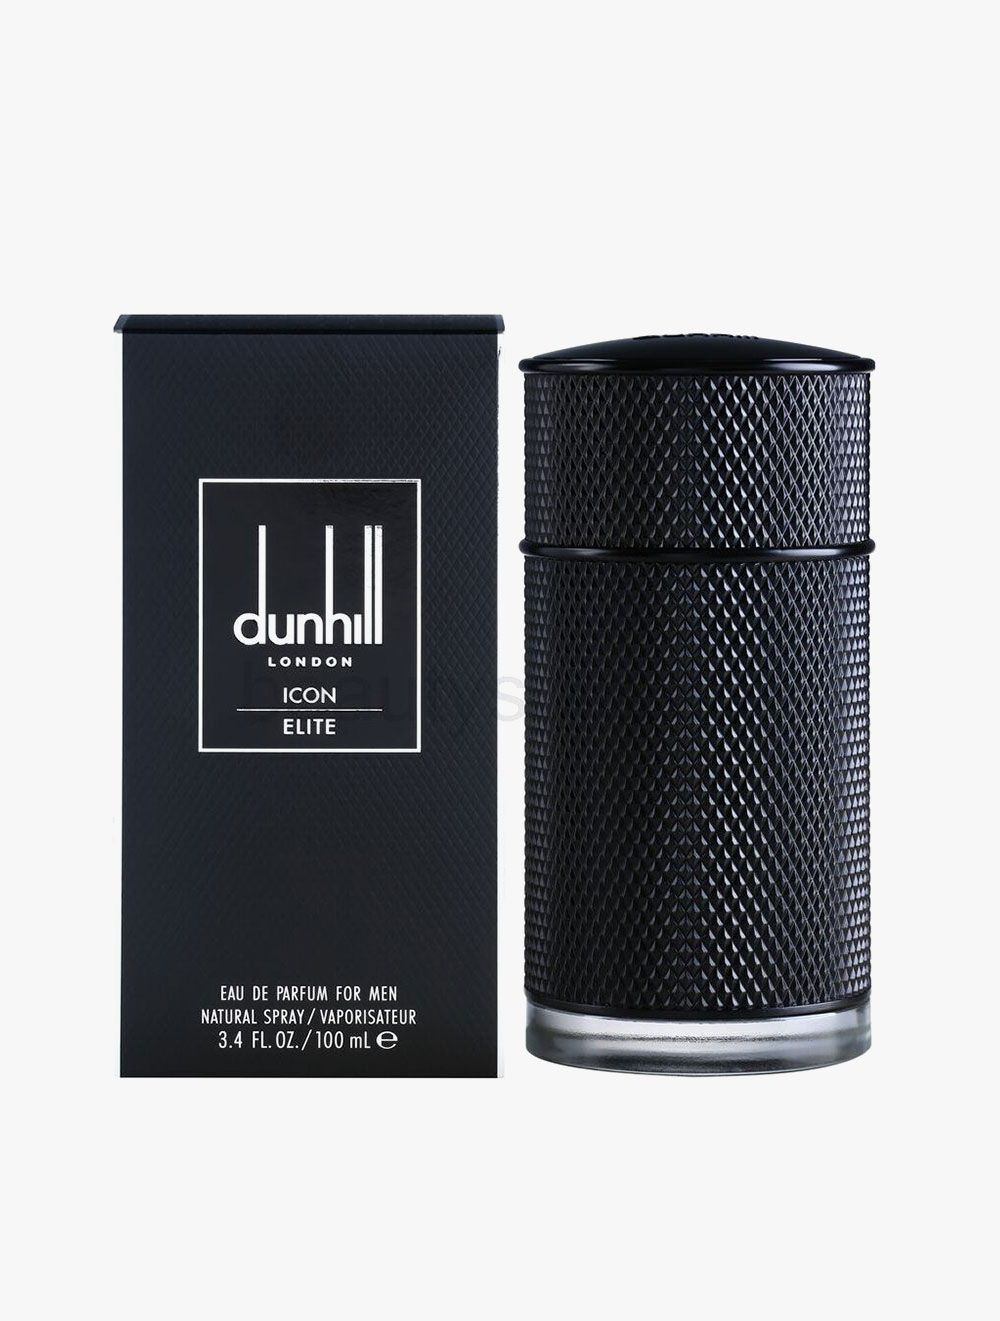 Icon духи мужские. Dunhill London Alfred Dunhill. Данхилл Айкон. Dunhill icon 30 ml. Dunhill Парфюм мужской.